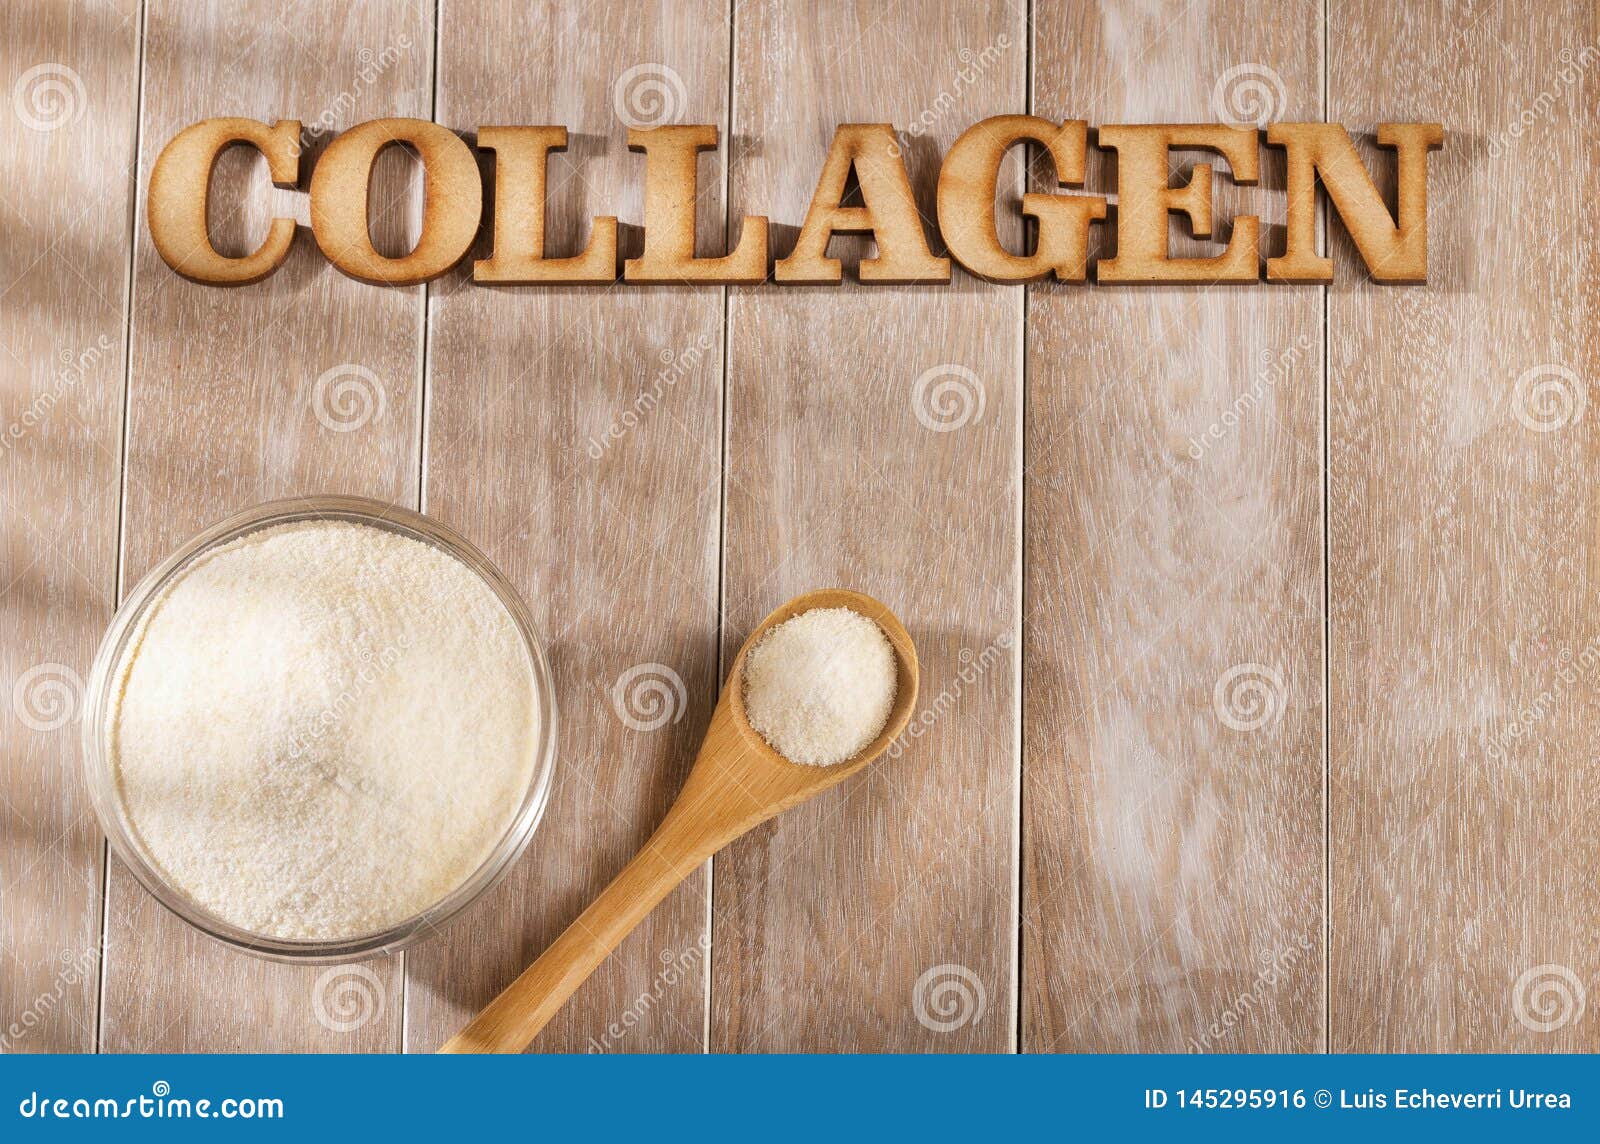 collagen protein powder - hydrolyzed. strengthening and improving the health of cartilage and tendons